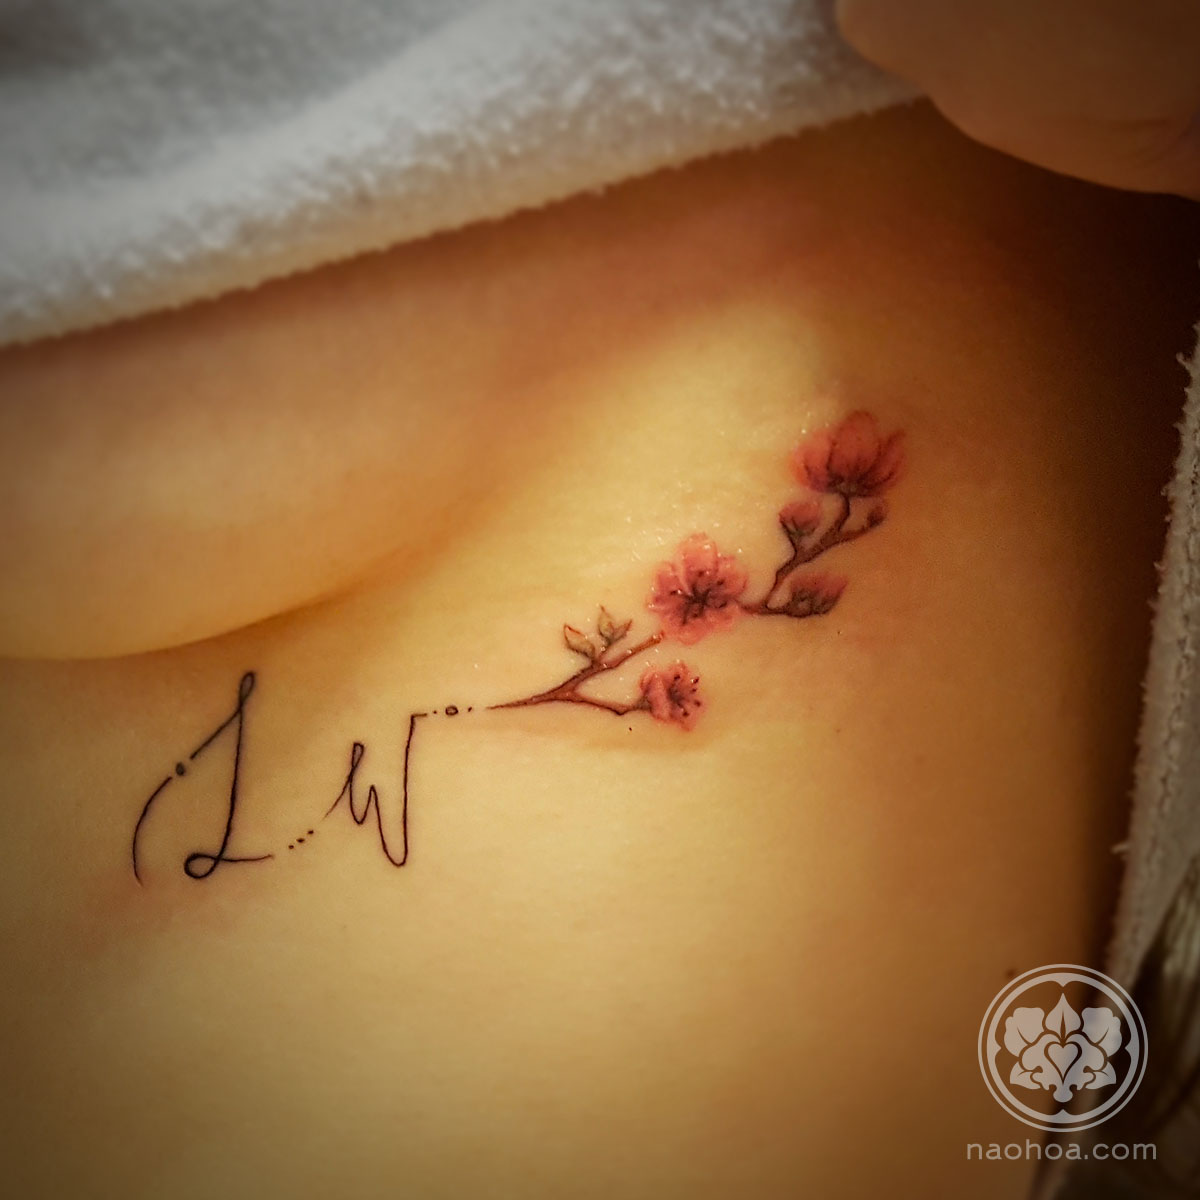 A delicate tattoo of the initials 'LW' with a branch of cherry blossoms, placed just under the woman's breast. Designed and tattooed by Naomi Hoang at NAOHOA Luxury Bespoke Tattoos, Cardiff (Wales, UK).